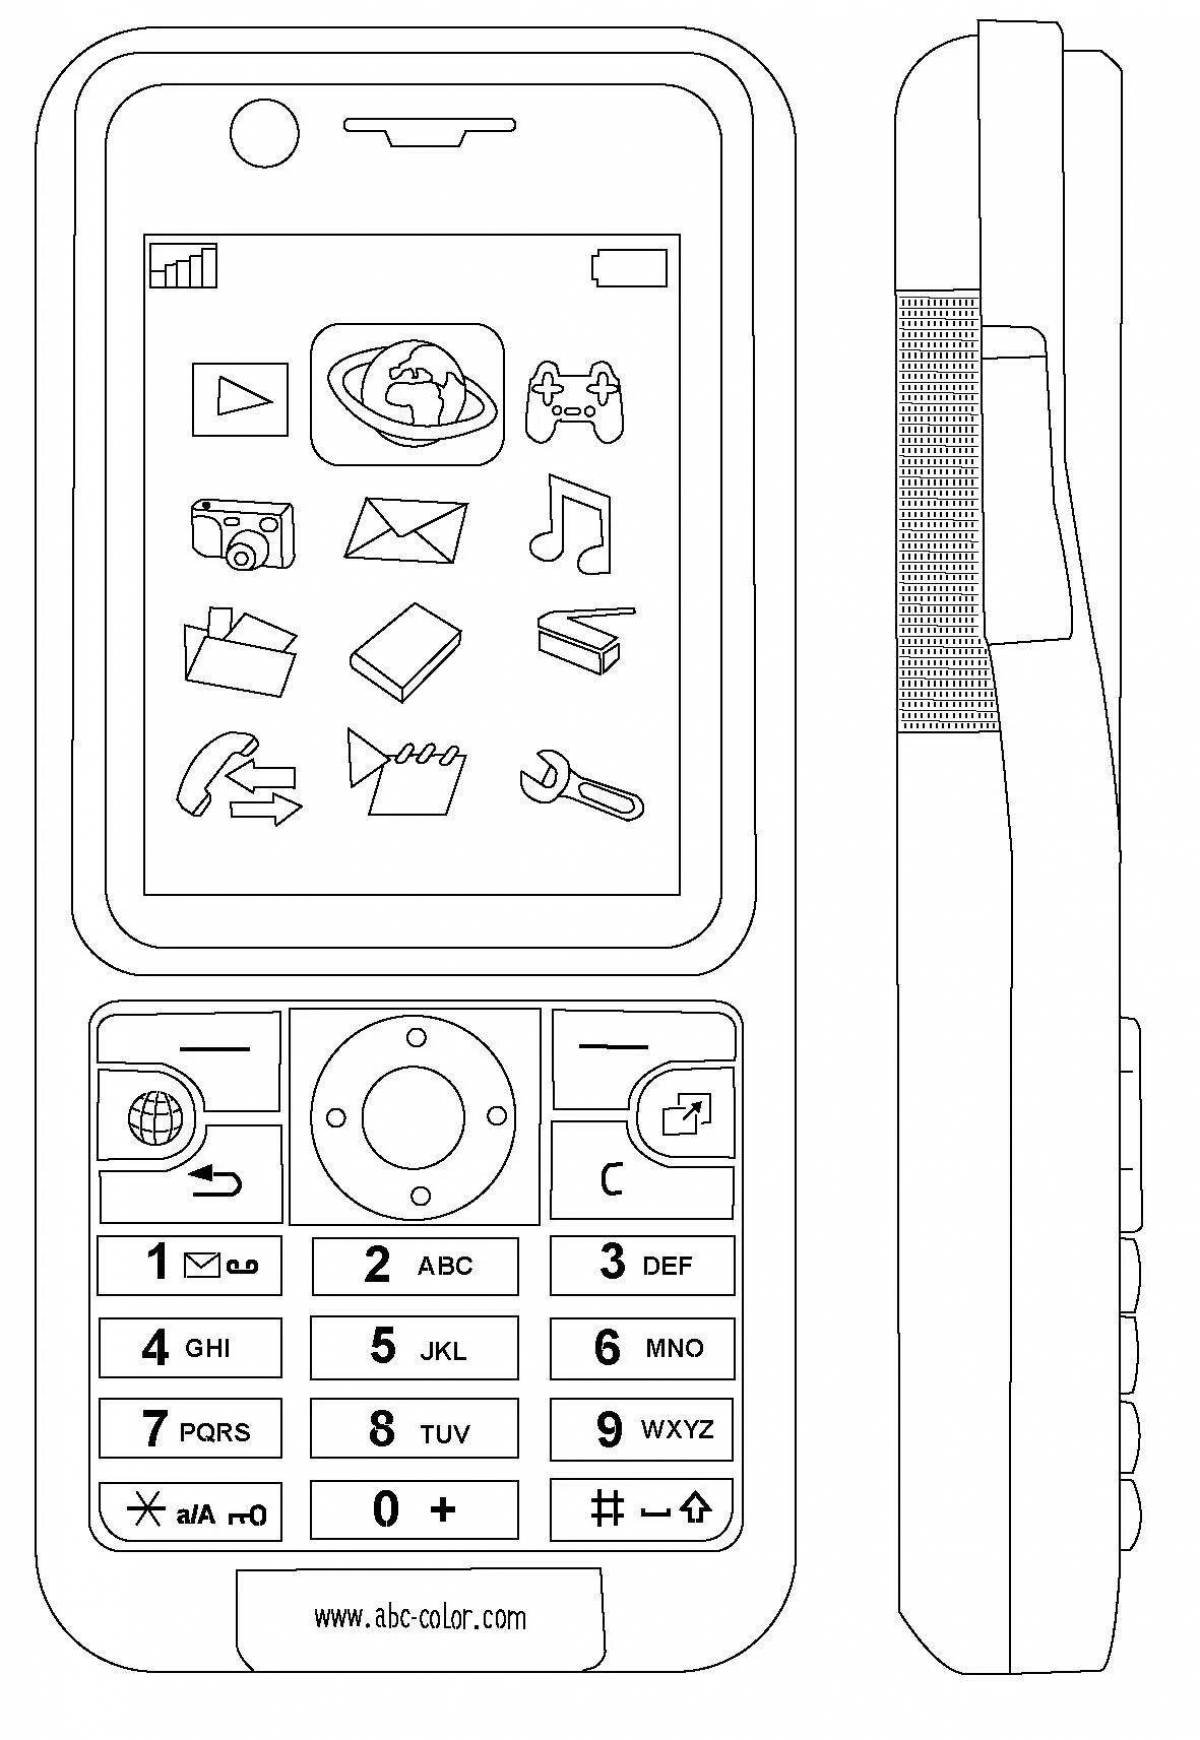 Adorable cell phone coloring page